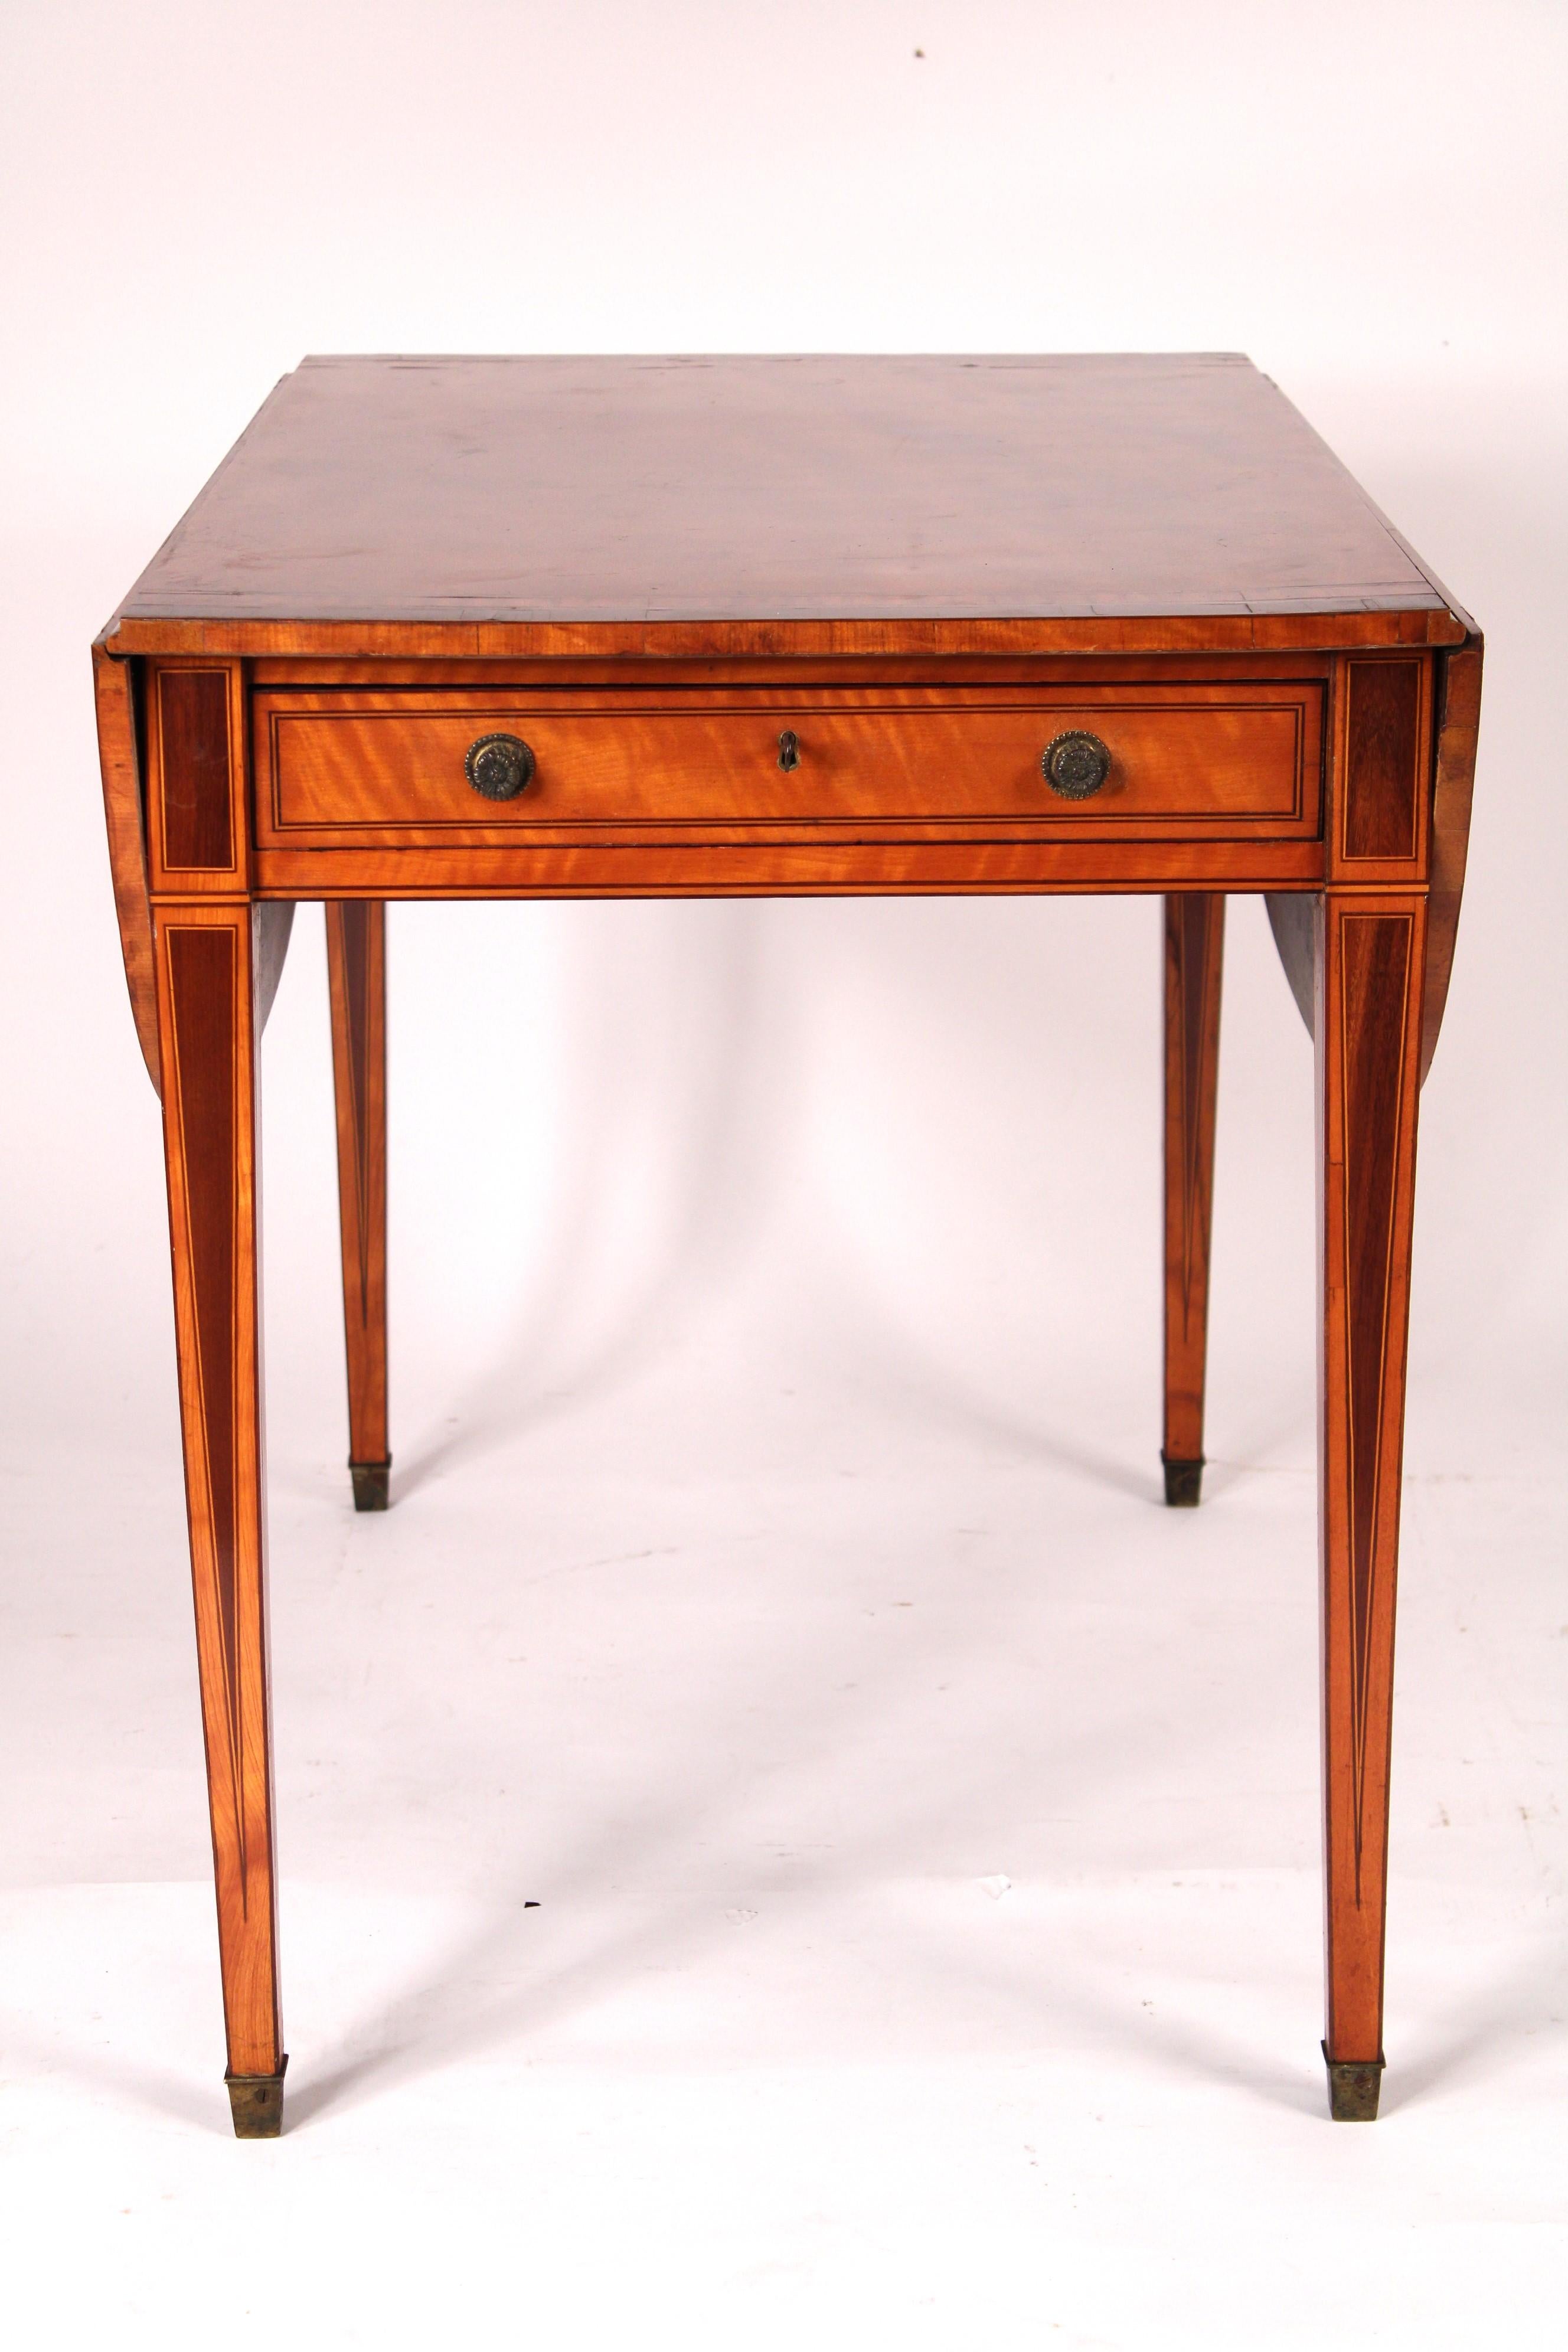 Early 20th Century English Edwardian Satinwood Pembroke Table For Sale